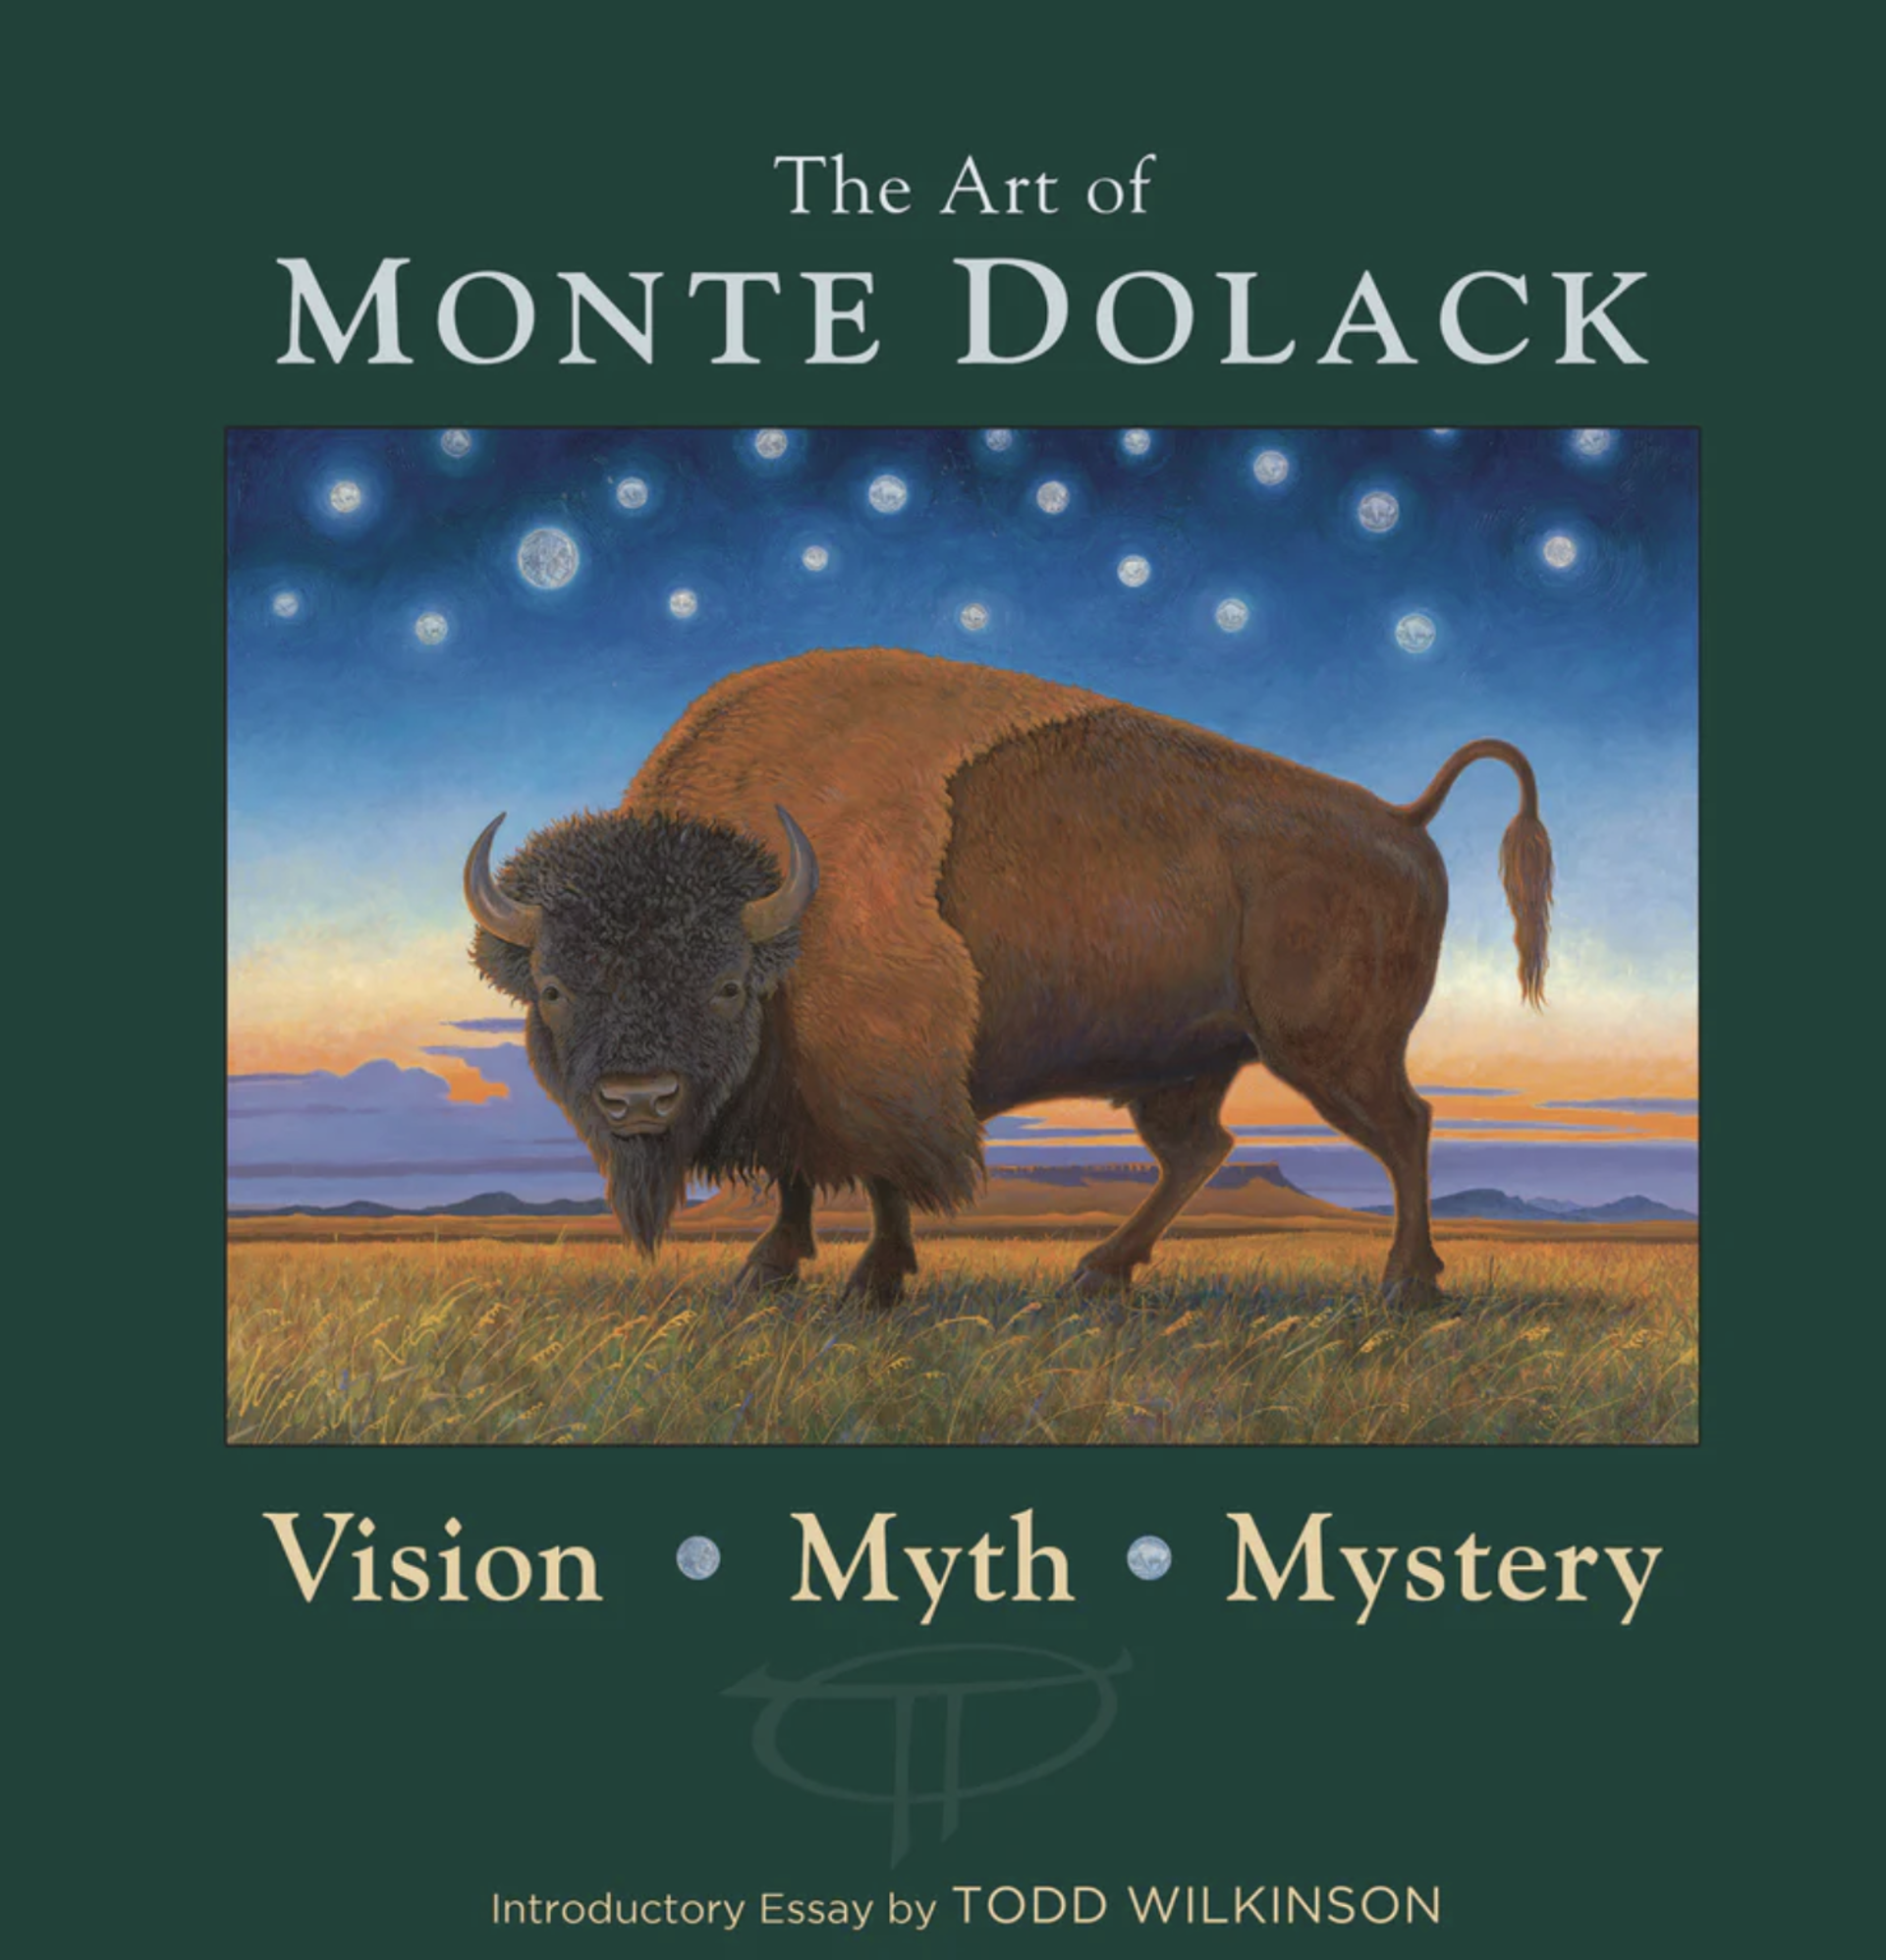 THE ART OF MONTE DOLACK by Todd Wilkinson